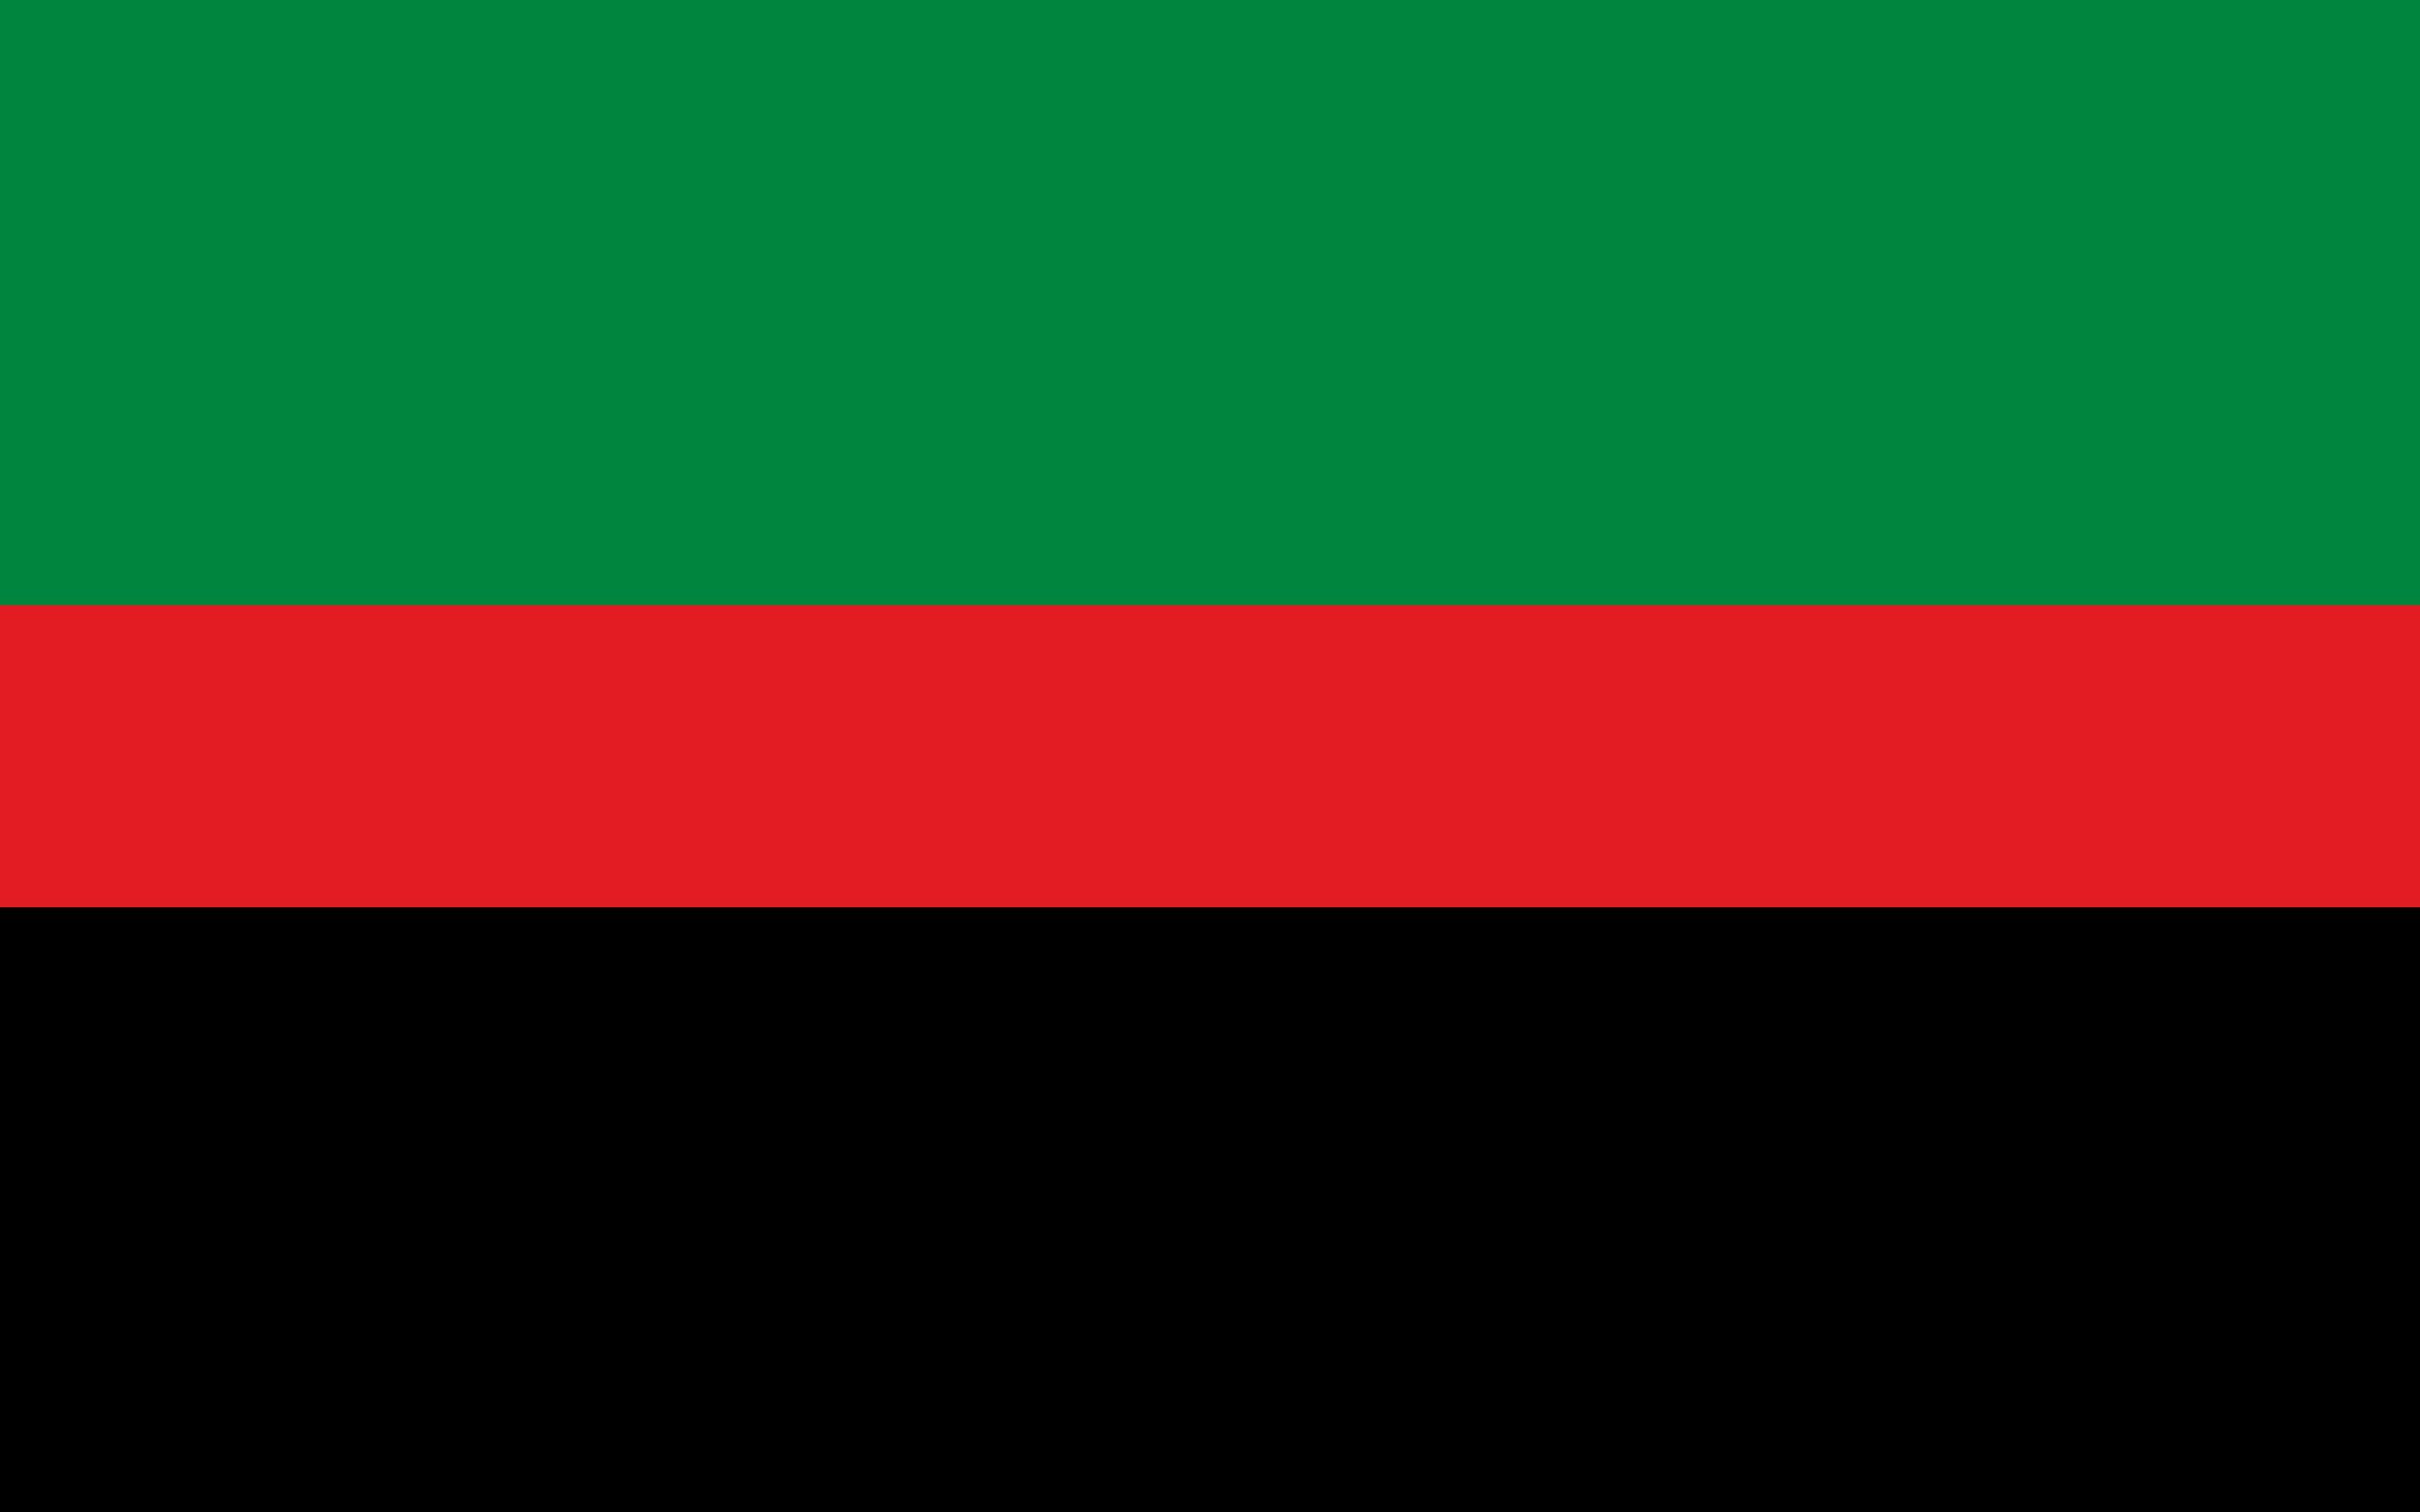 File:New Afrikan flag.png